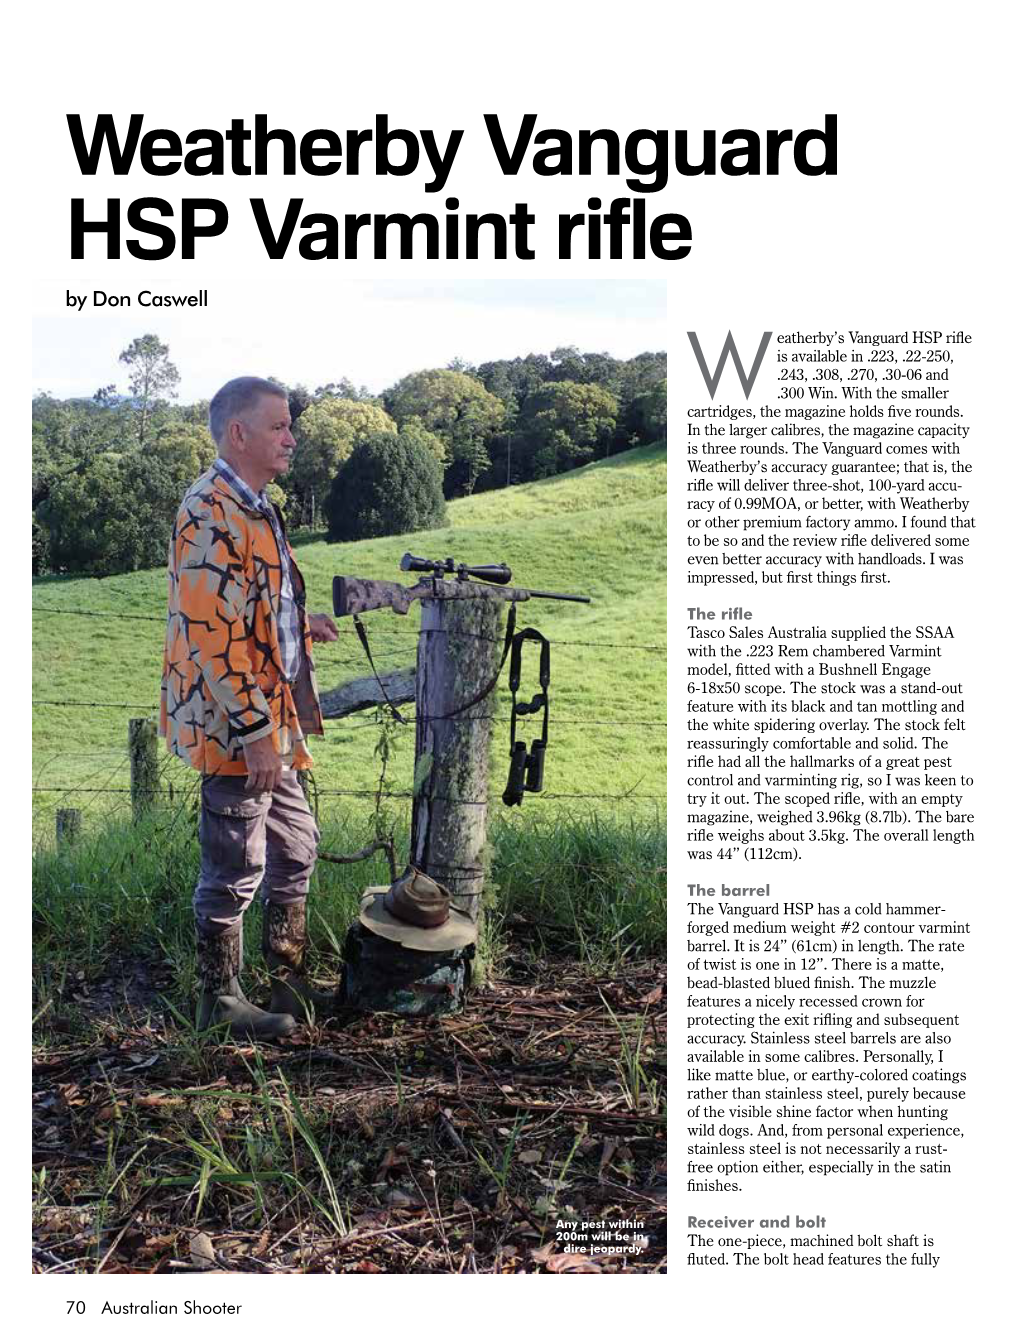 Weatherby Vanguard HSP Varmint Rifle by Don Caswell